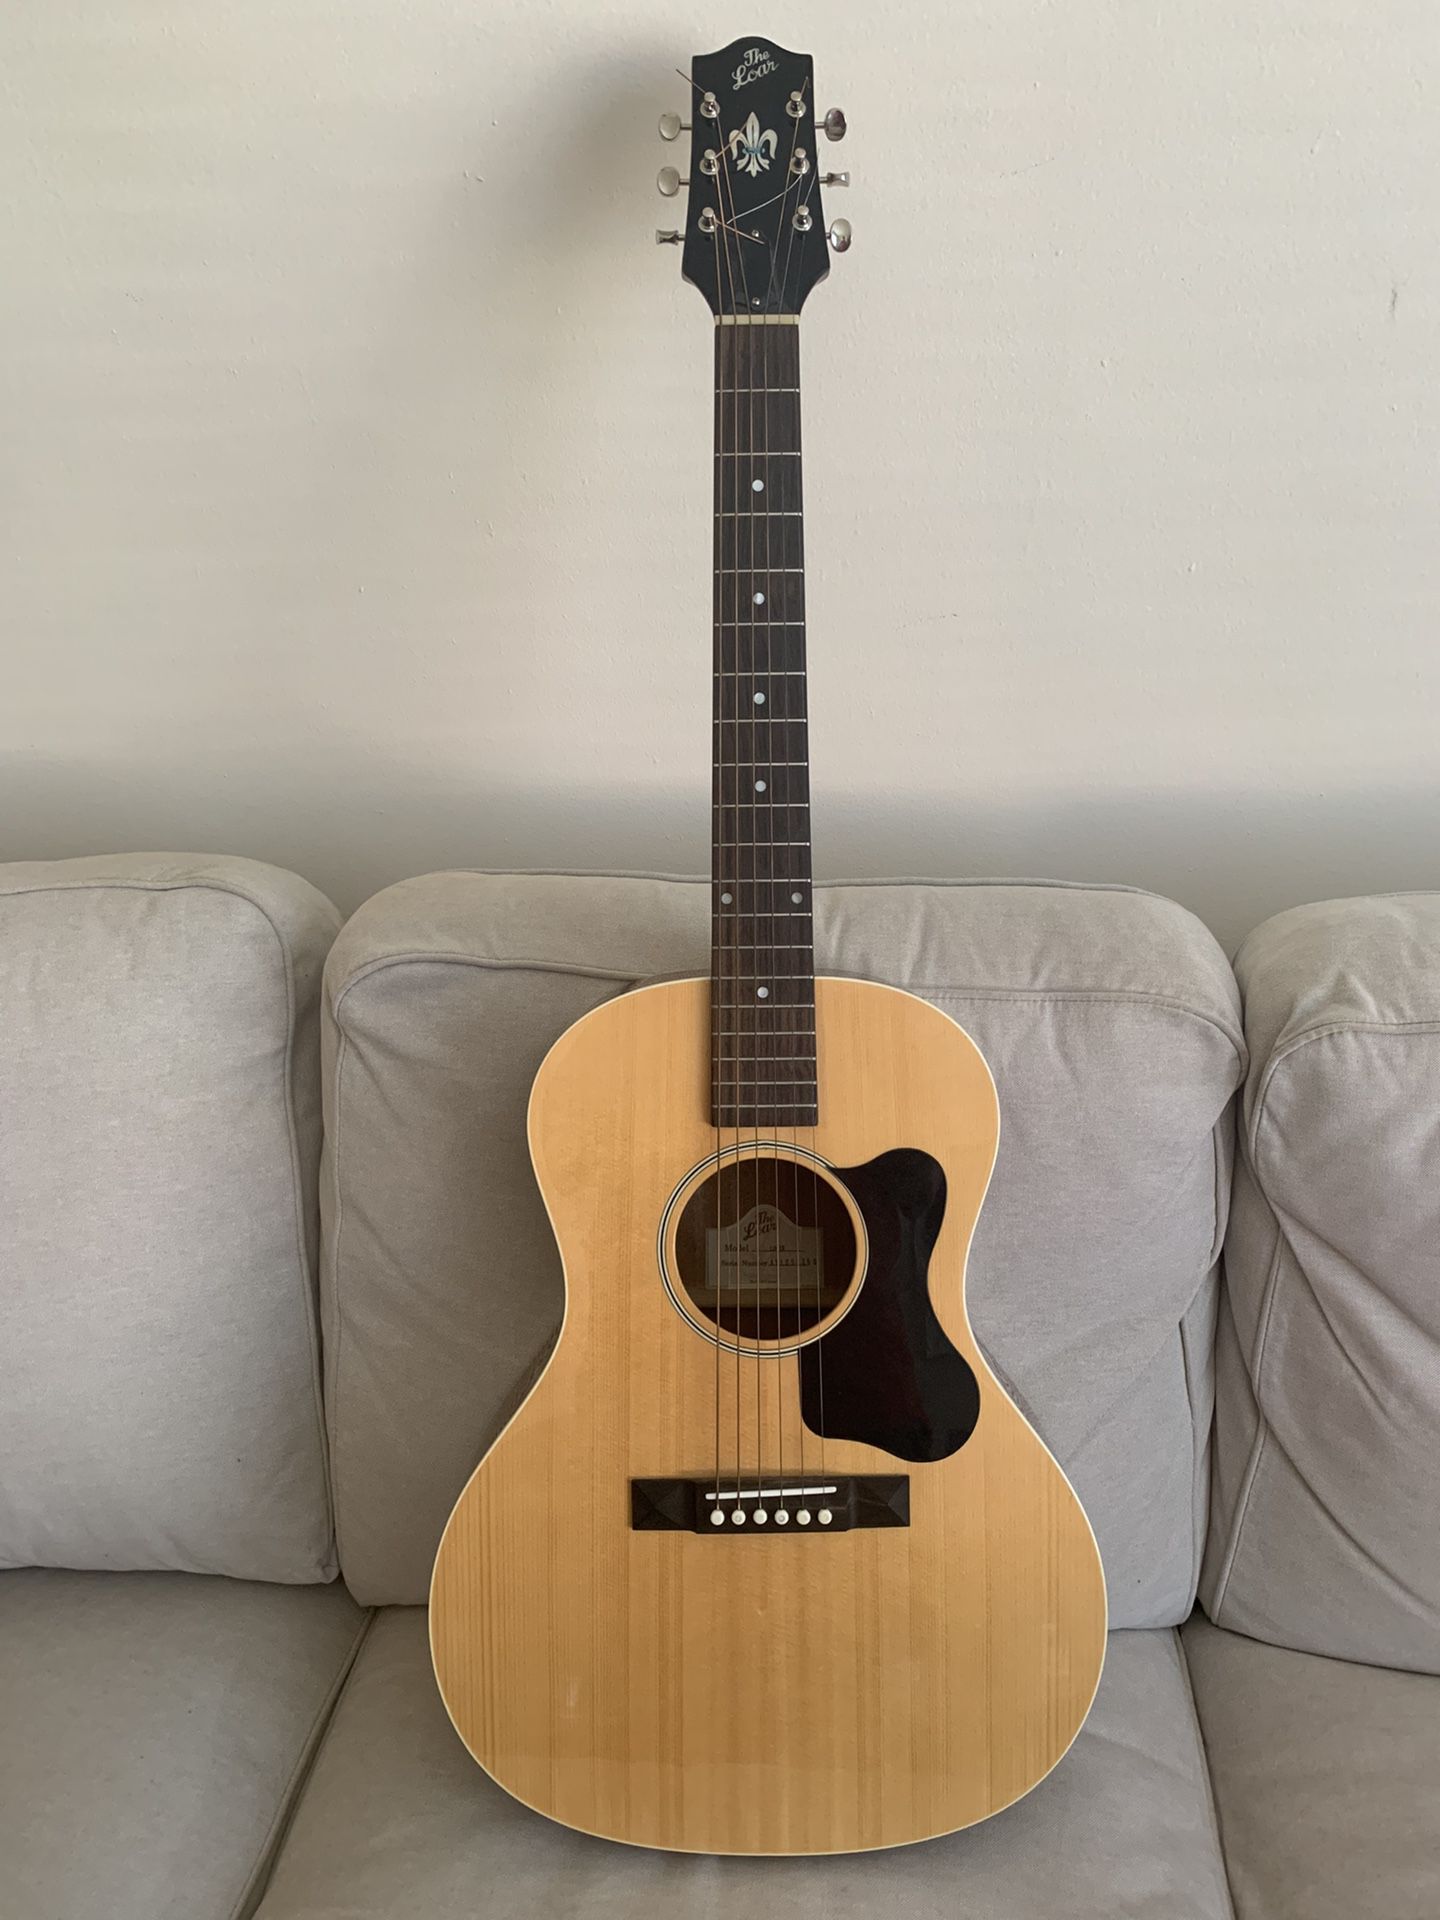 The Loar LO-16 Acoustic Guitar (Gibson Copy)